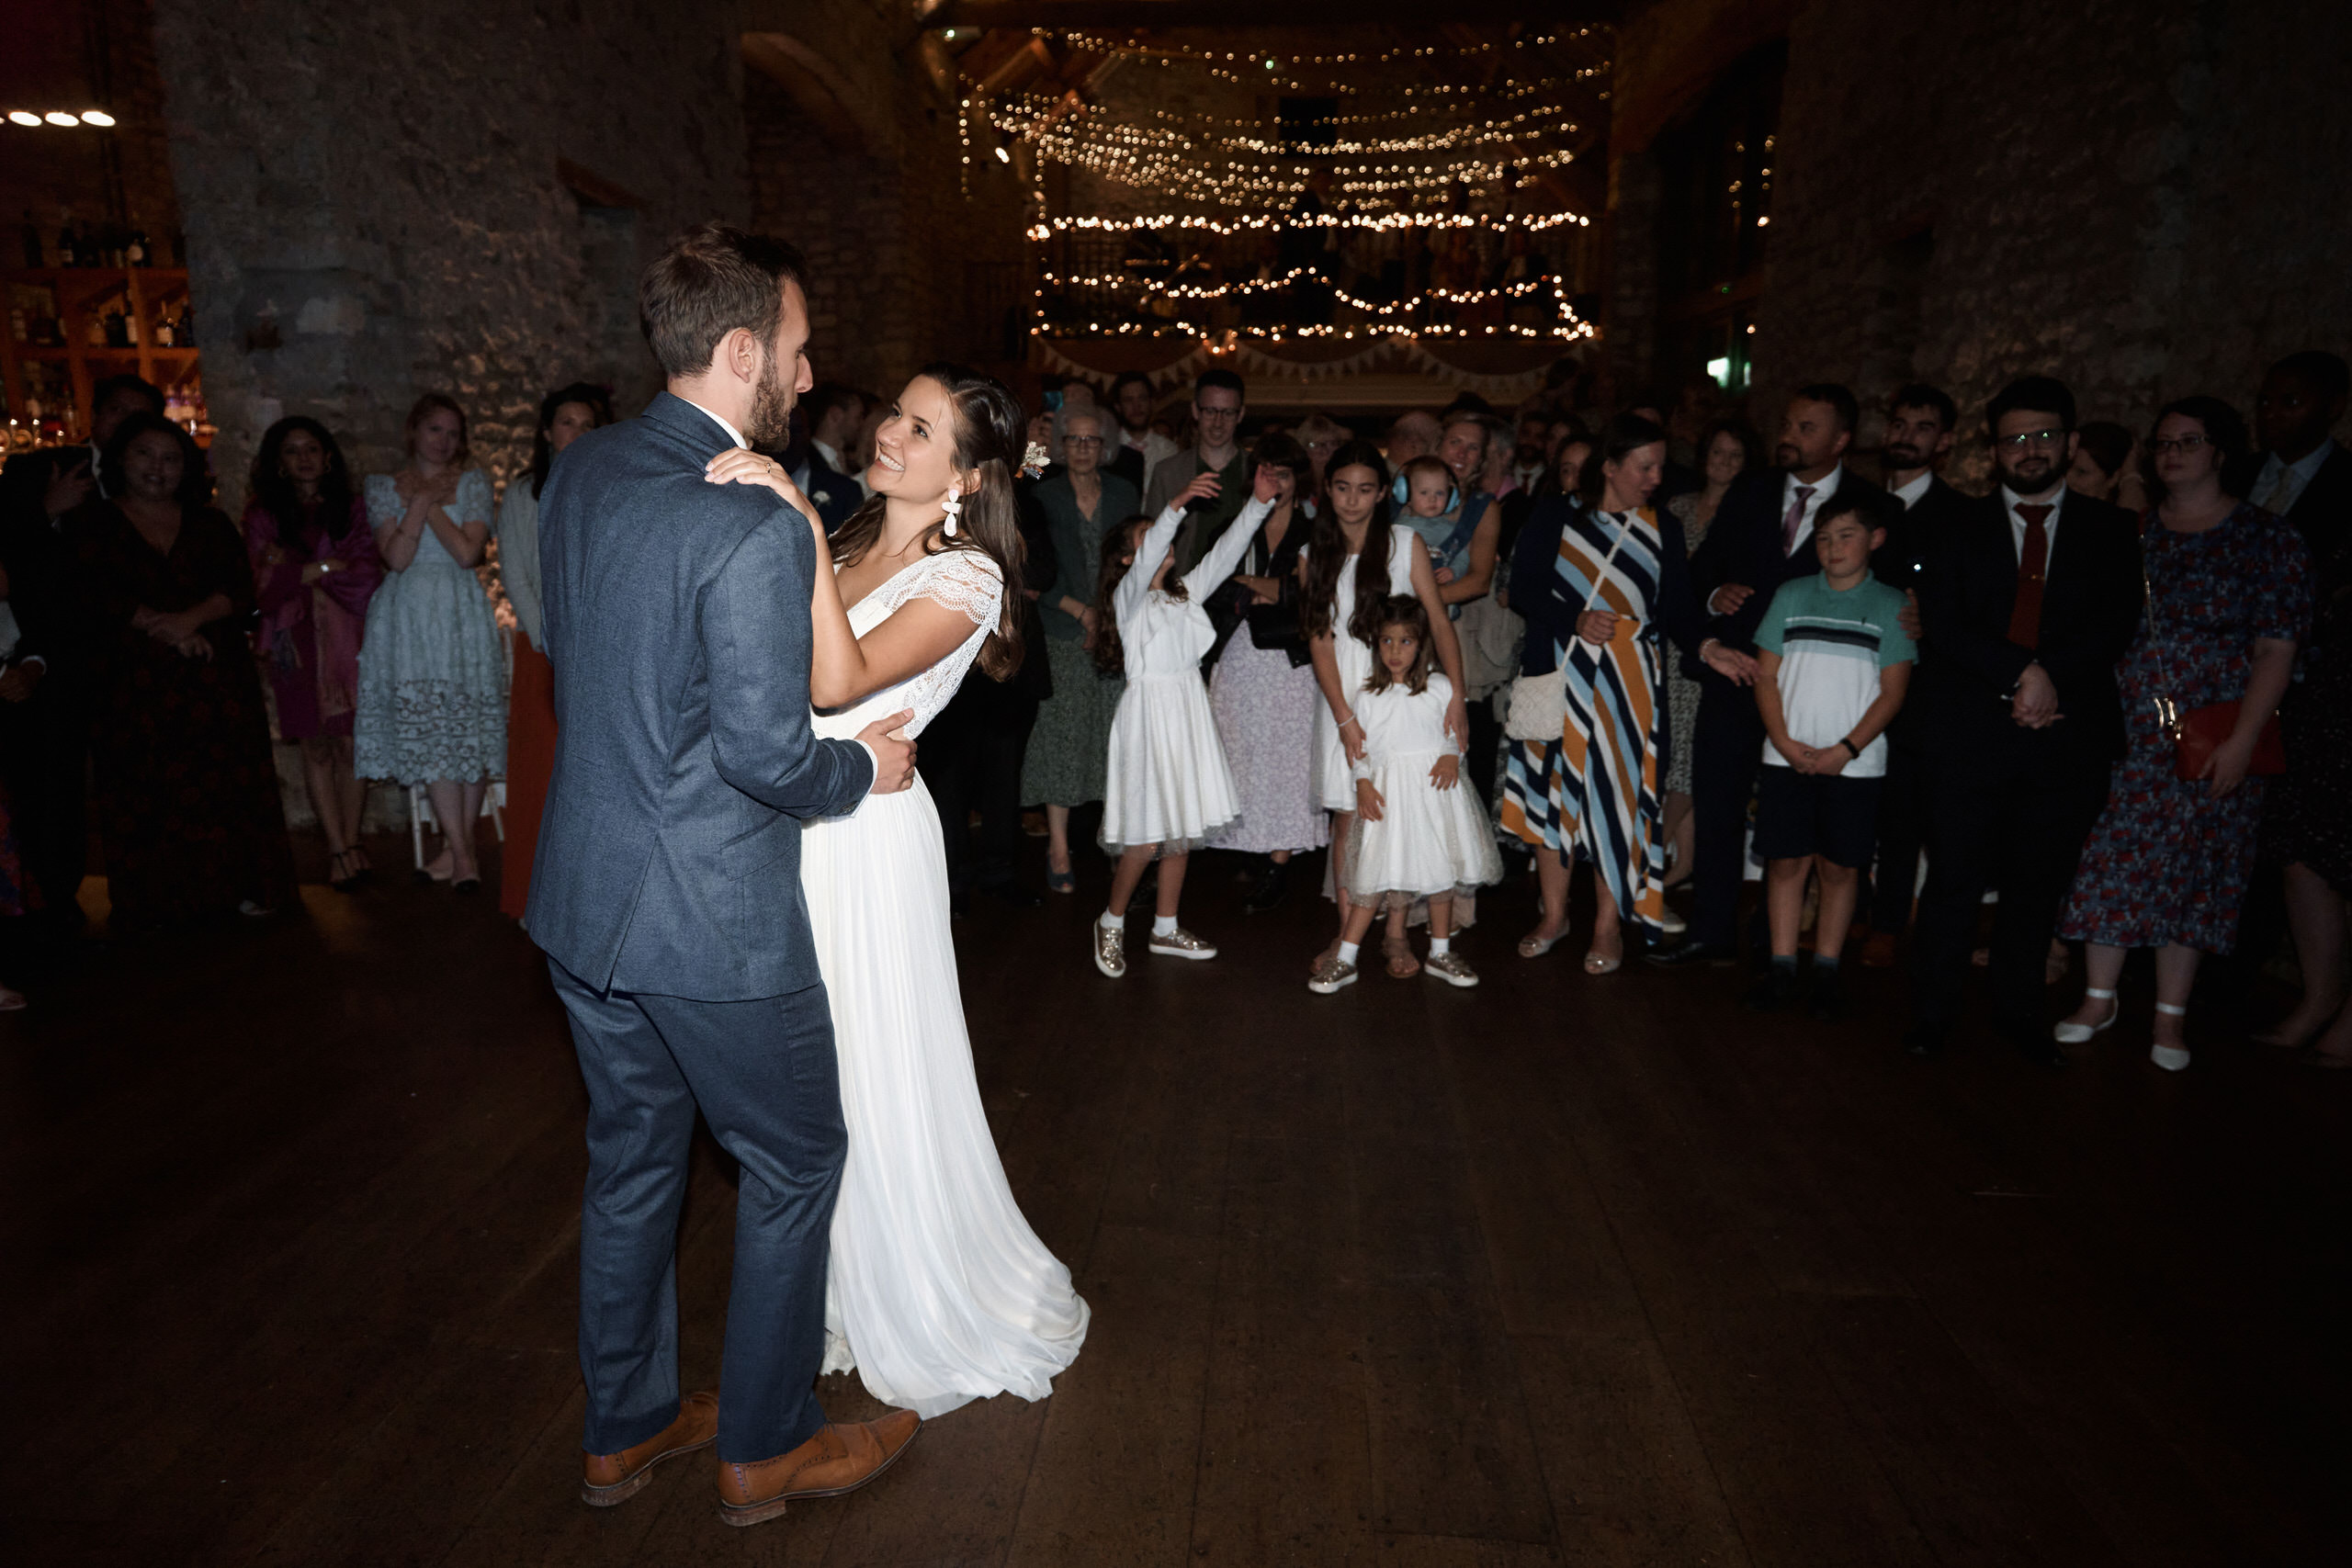 A couple is having their first dance in a barn after getting married.